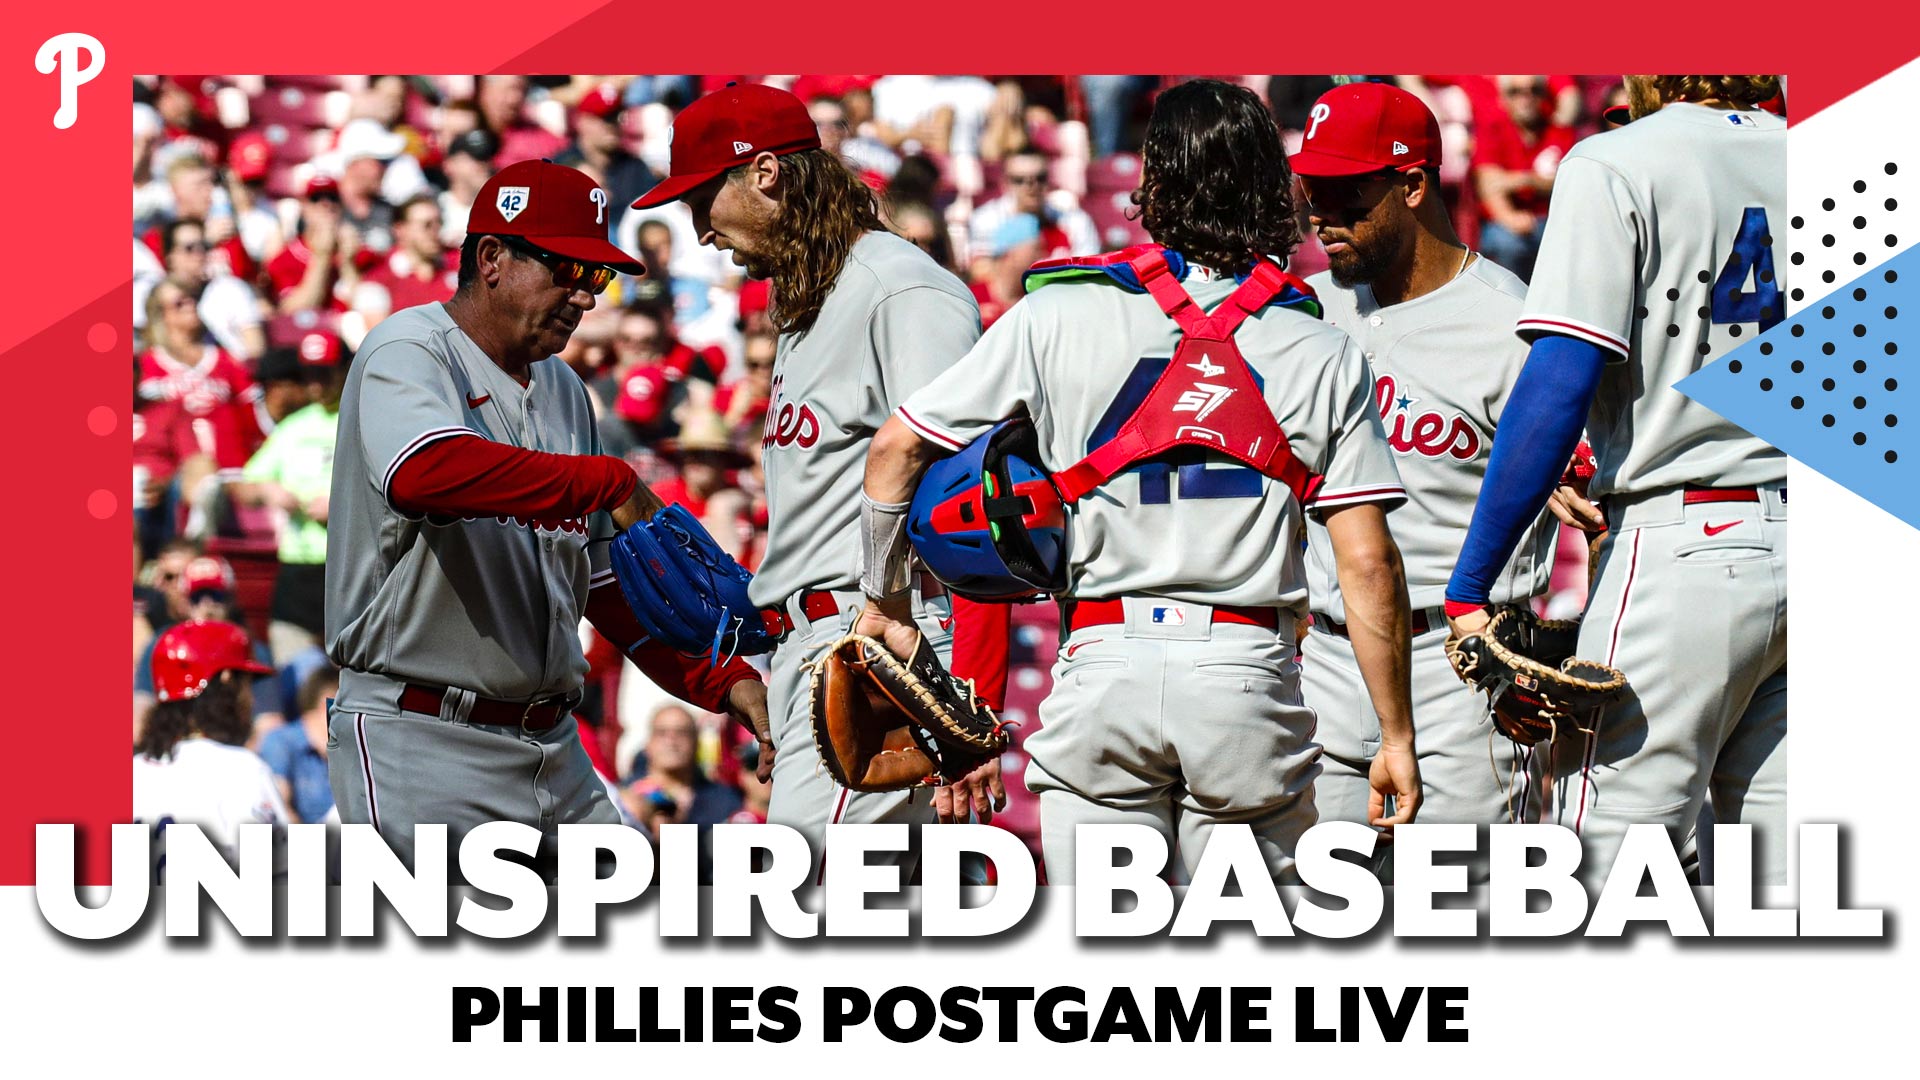 Phillies pitching the main cause of concern after uninspired loss